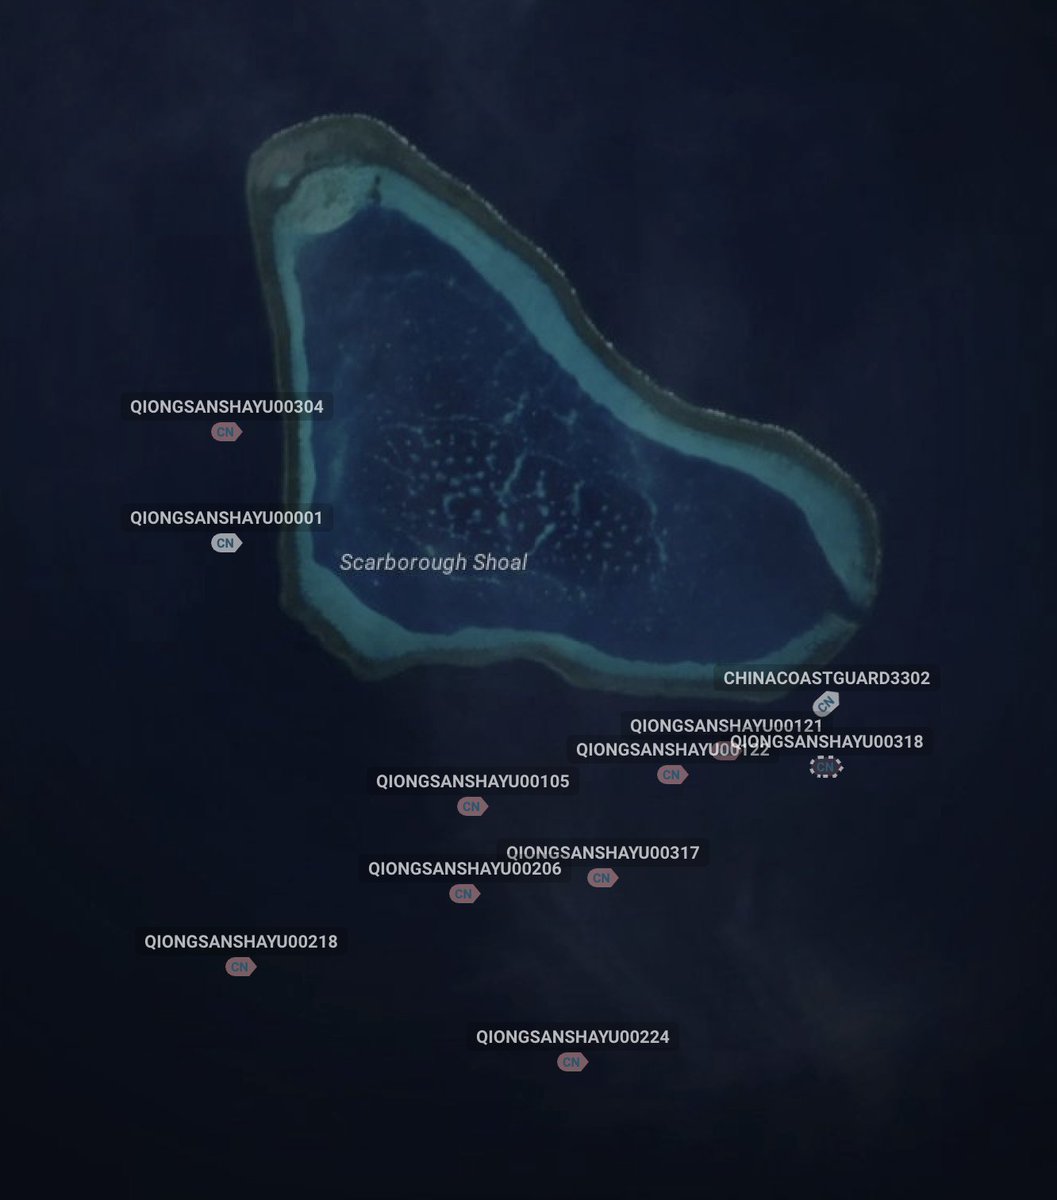 PRC vessel swarm at Scarborough Shoal in the Philippines' exclusive economic zone. Includes at least China Coast Guard 3106 (currently running AIS-dark) & CCG 3302 plus 10 large Qiong Sansha Yu maritime militia ships